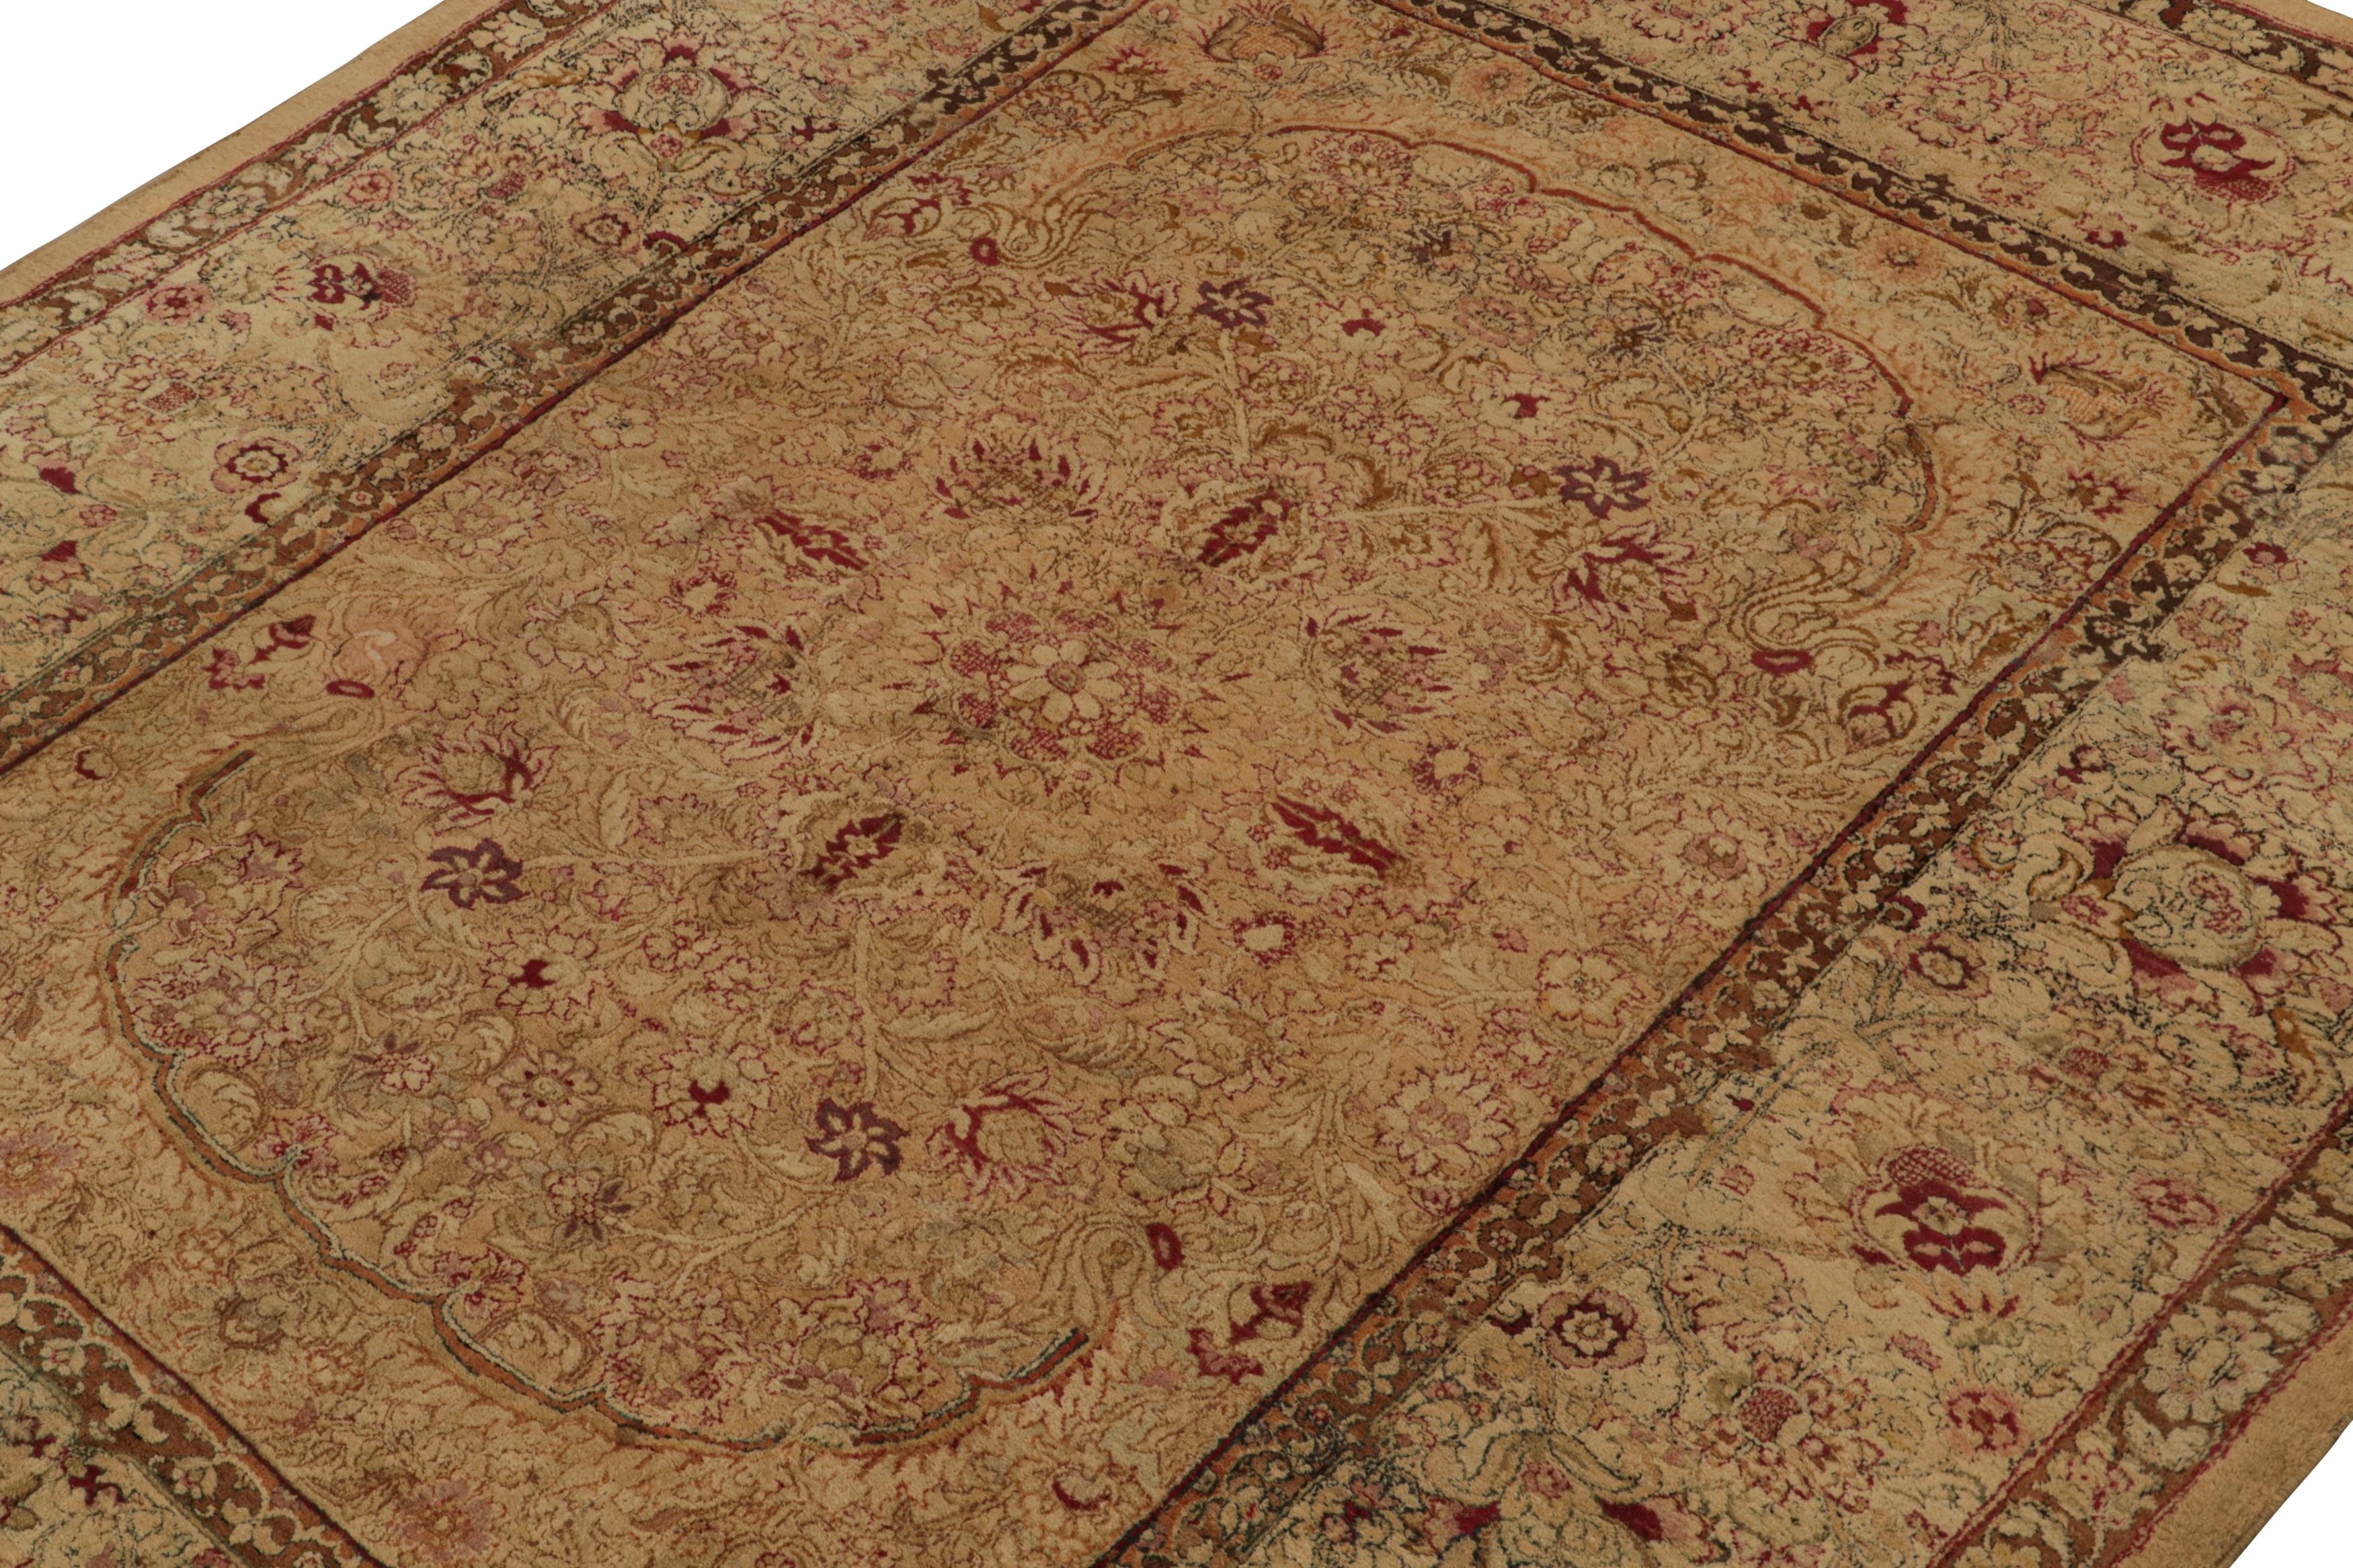 Hand-Knotted Antique Agra Rug in Gold and Brown with Floral Patterns For Sale